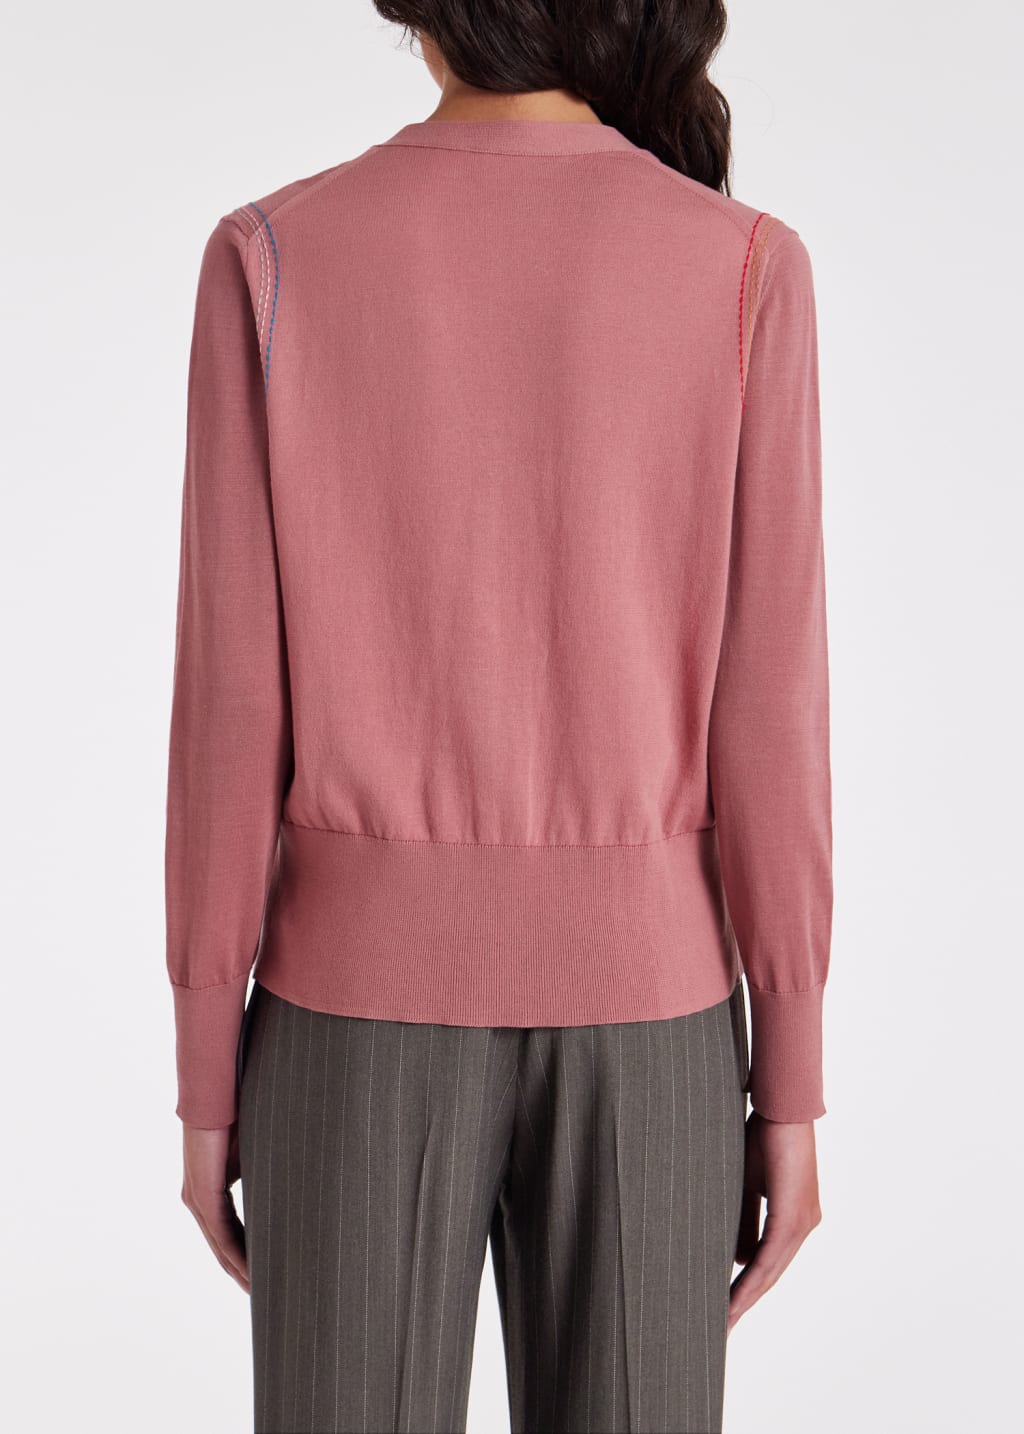 Model View - Women's Knitted Dusky Pink Organic Cotton Cardigan Paul Smith